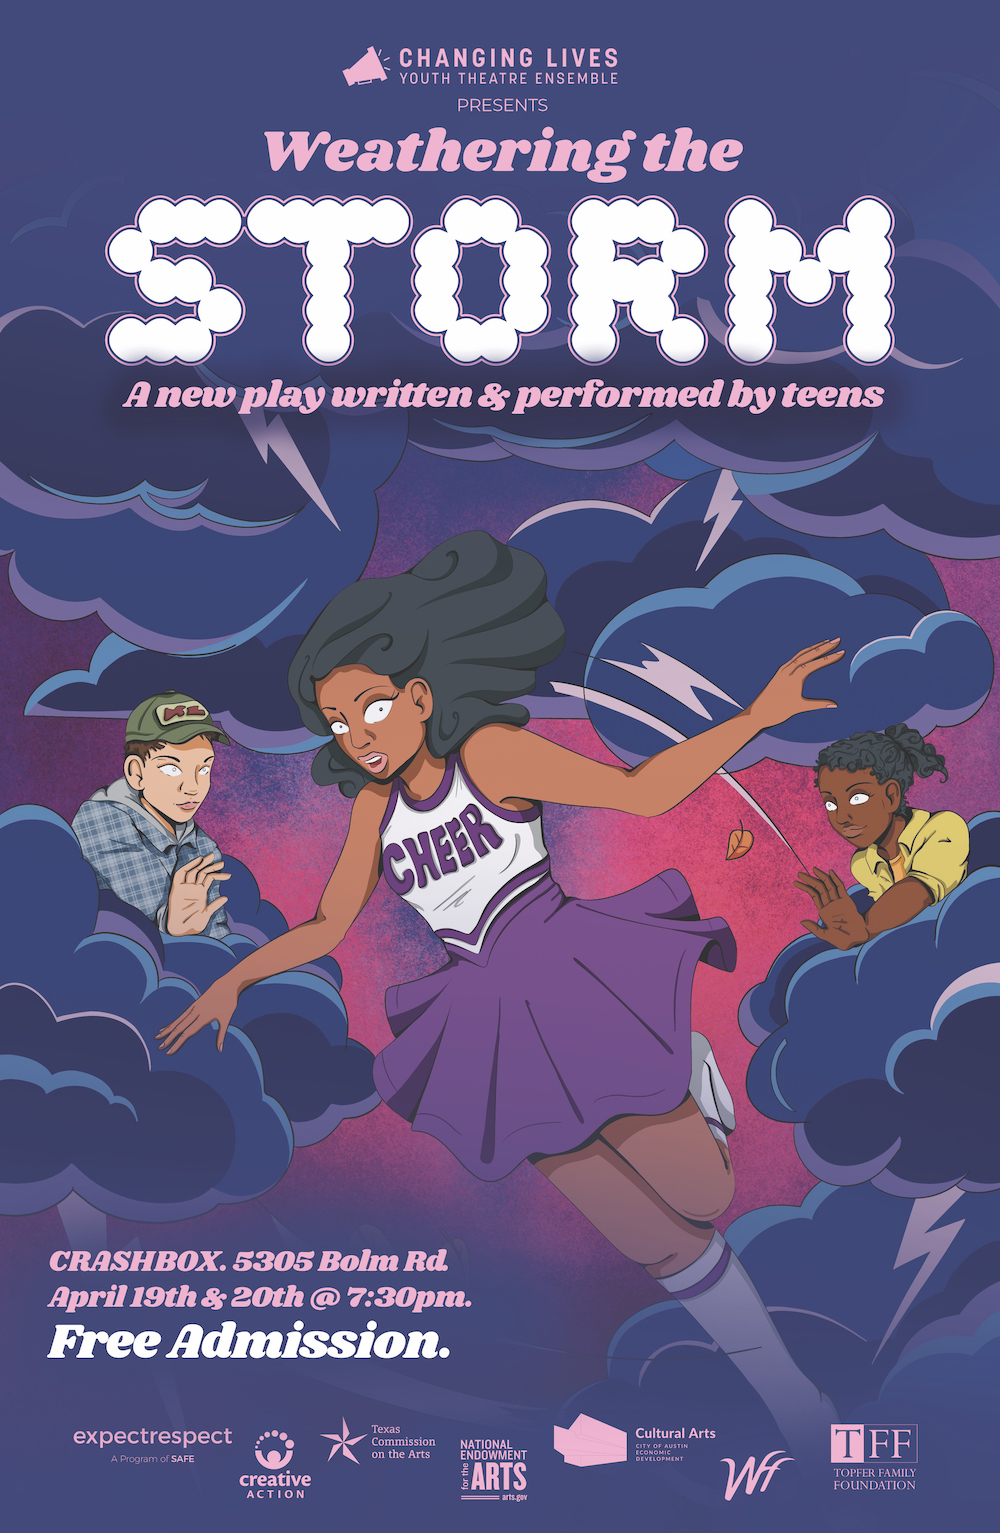 Weathering the Storm by Changing Lives Youth Theatre Ensemble